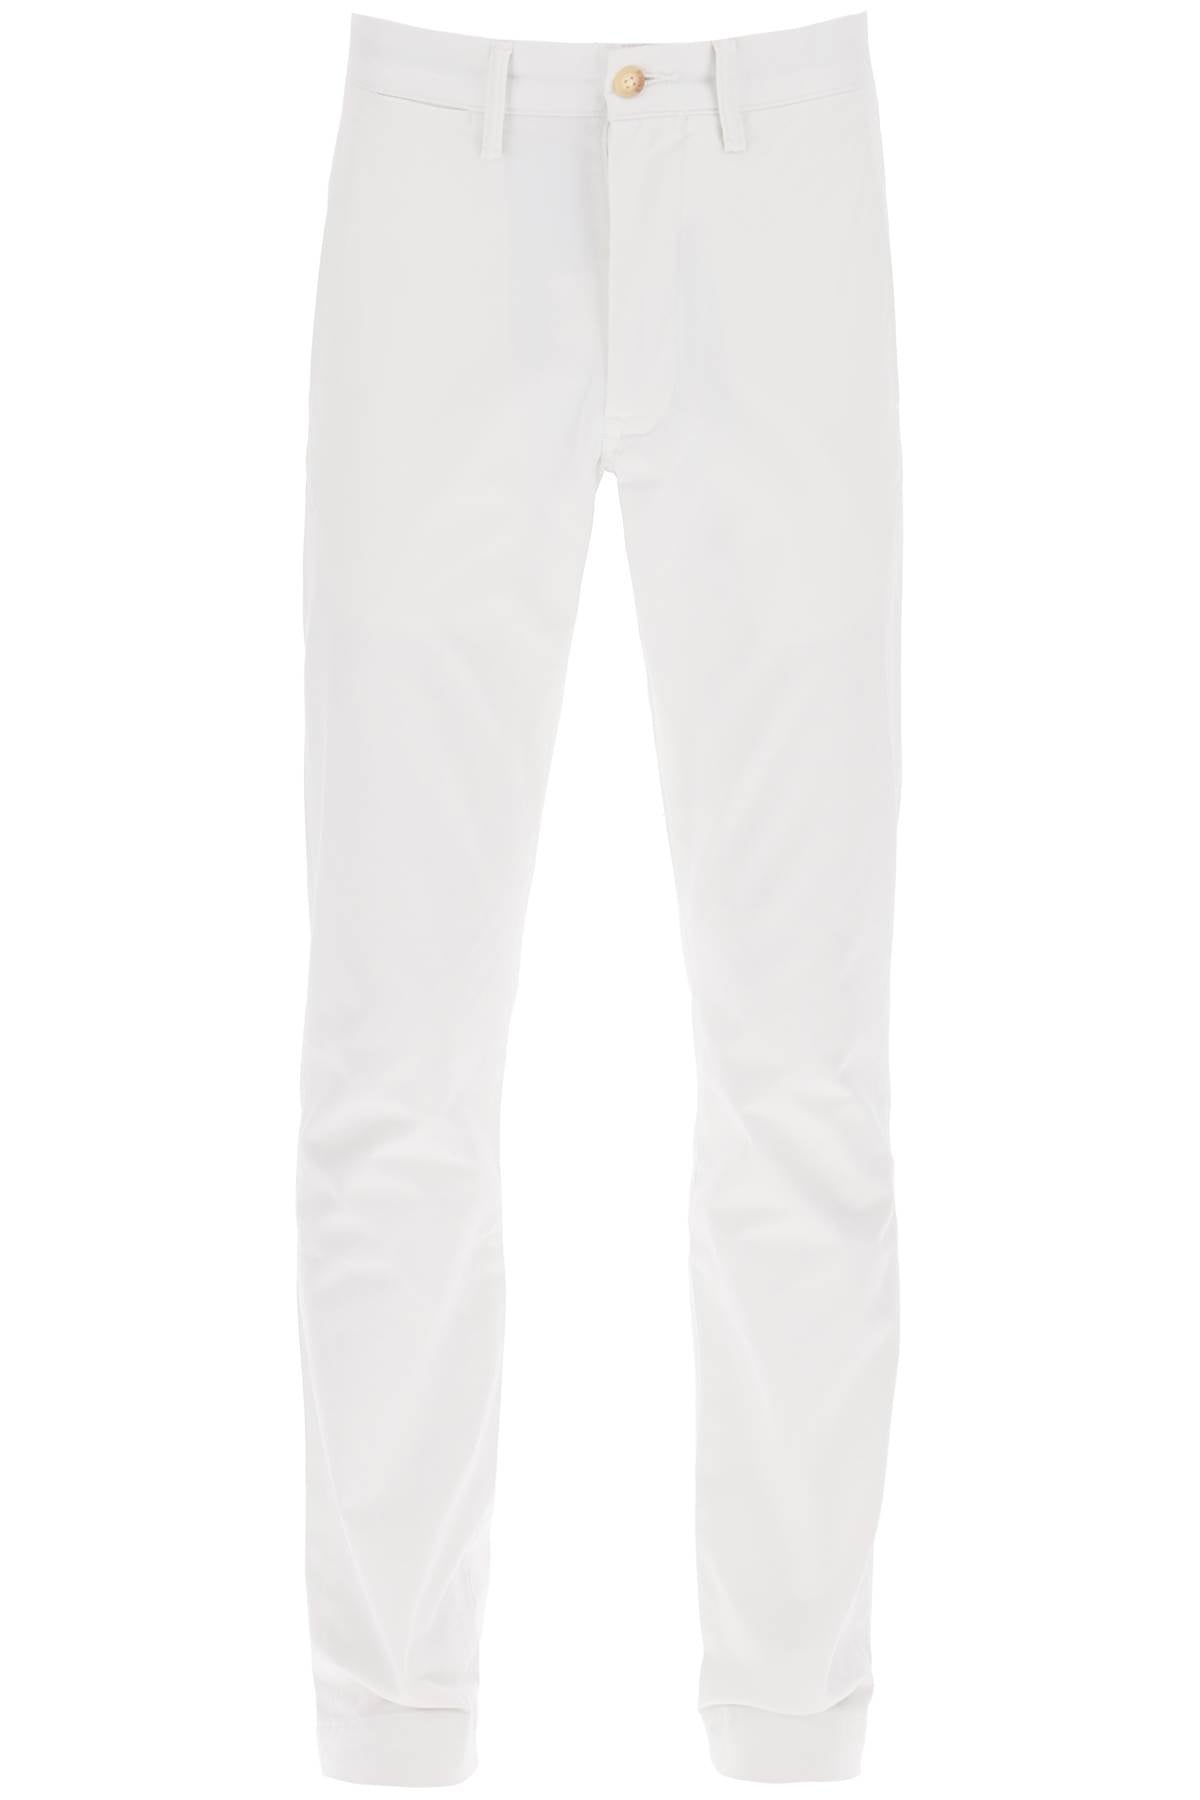 Polo ralph lauren chino pants in cotton-0